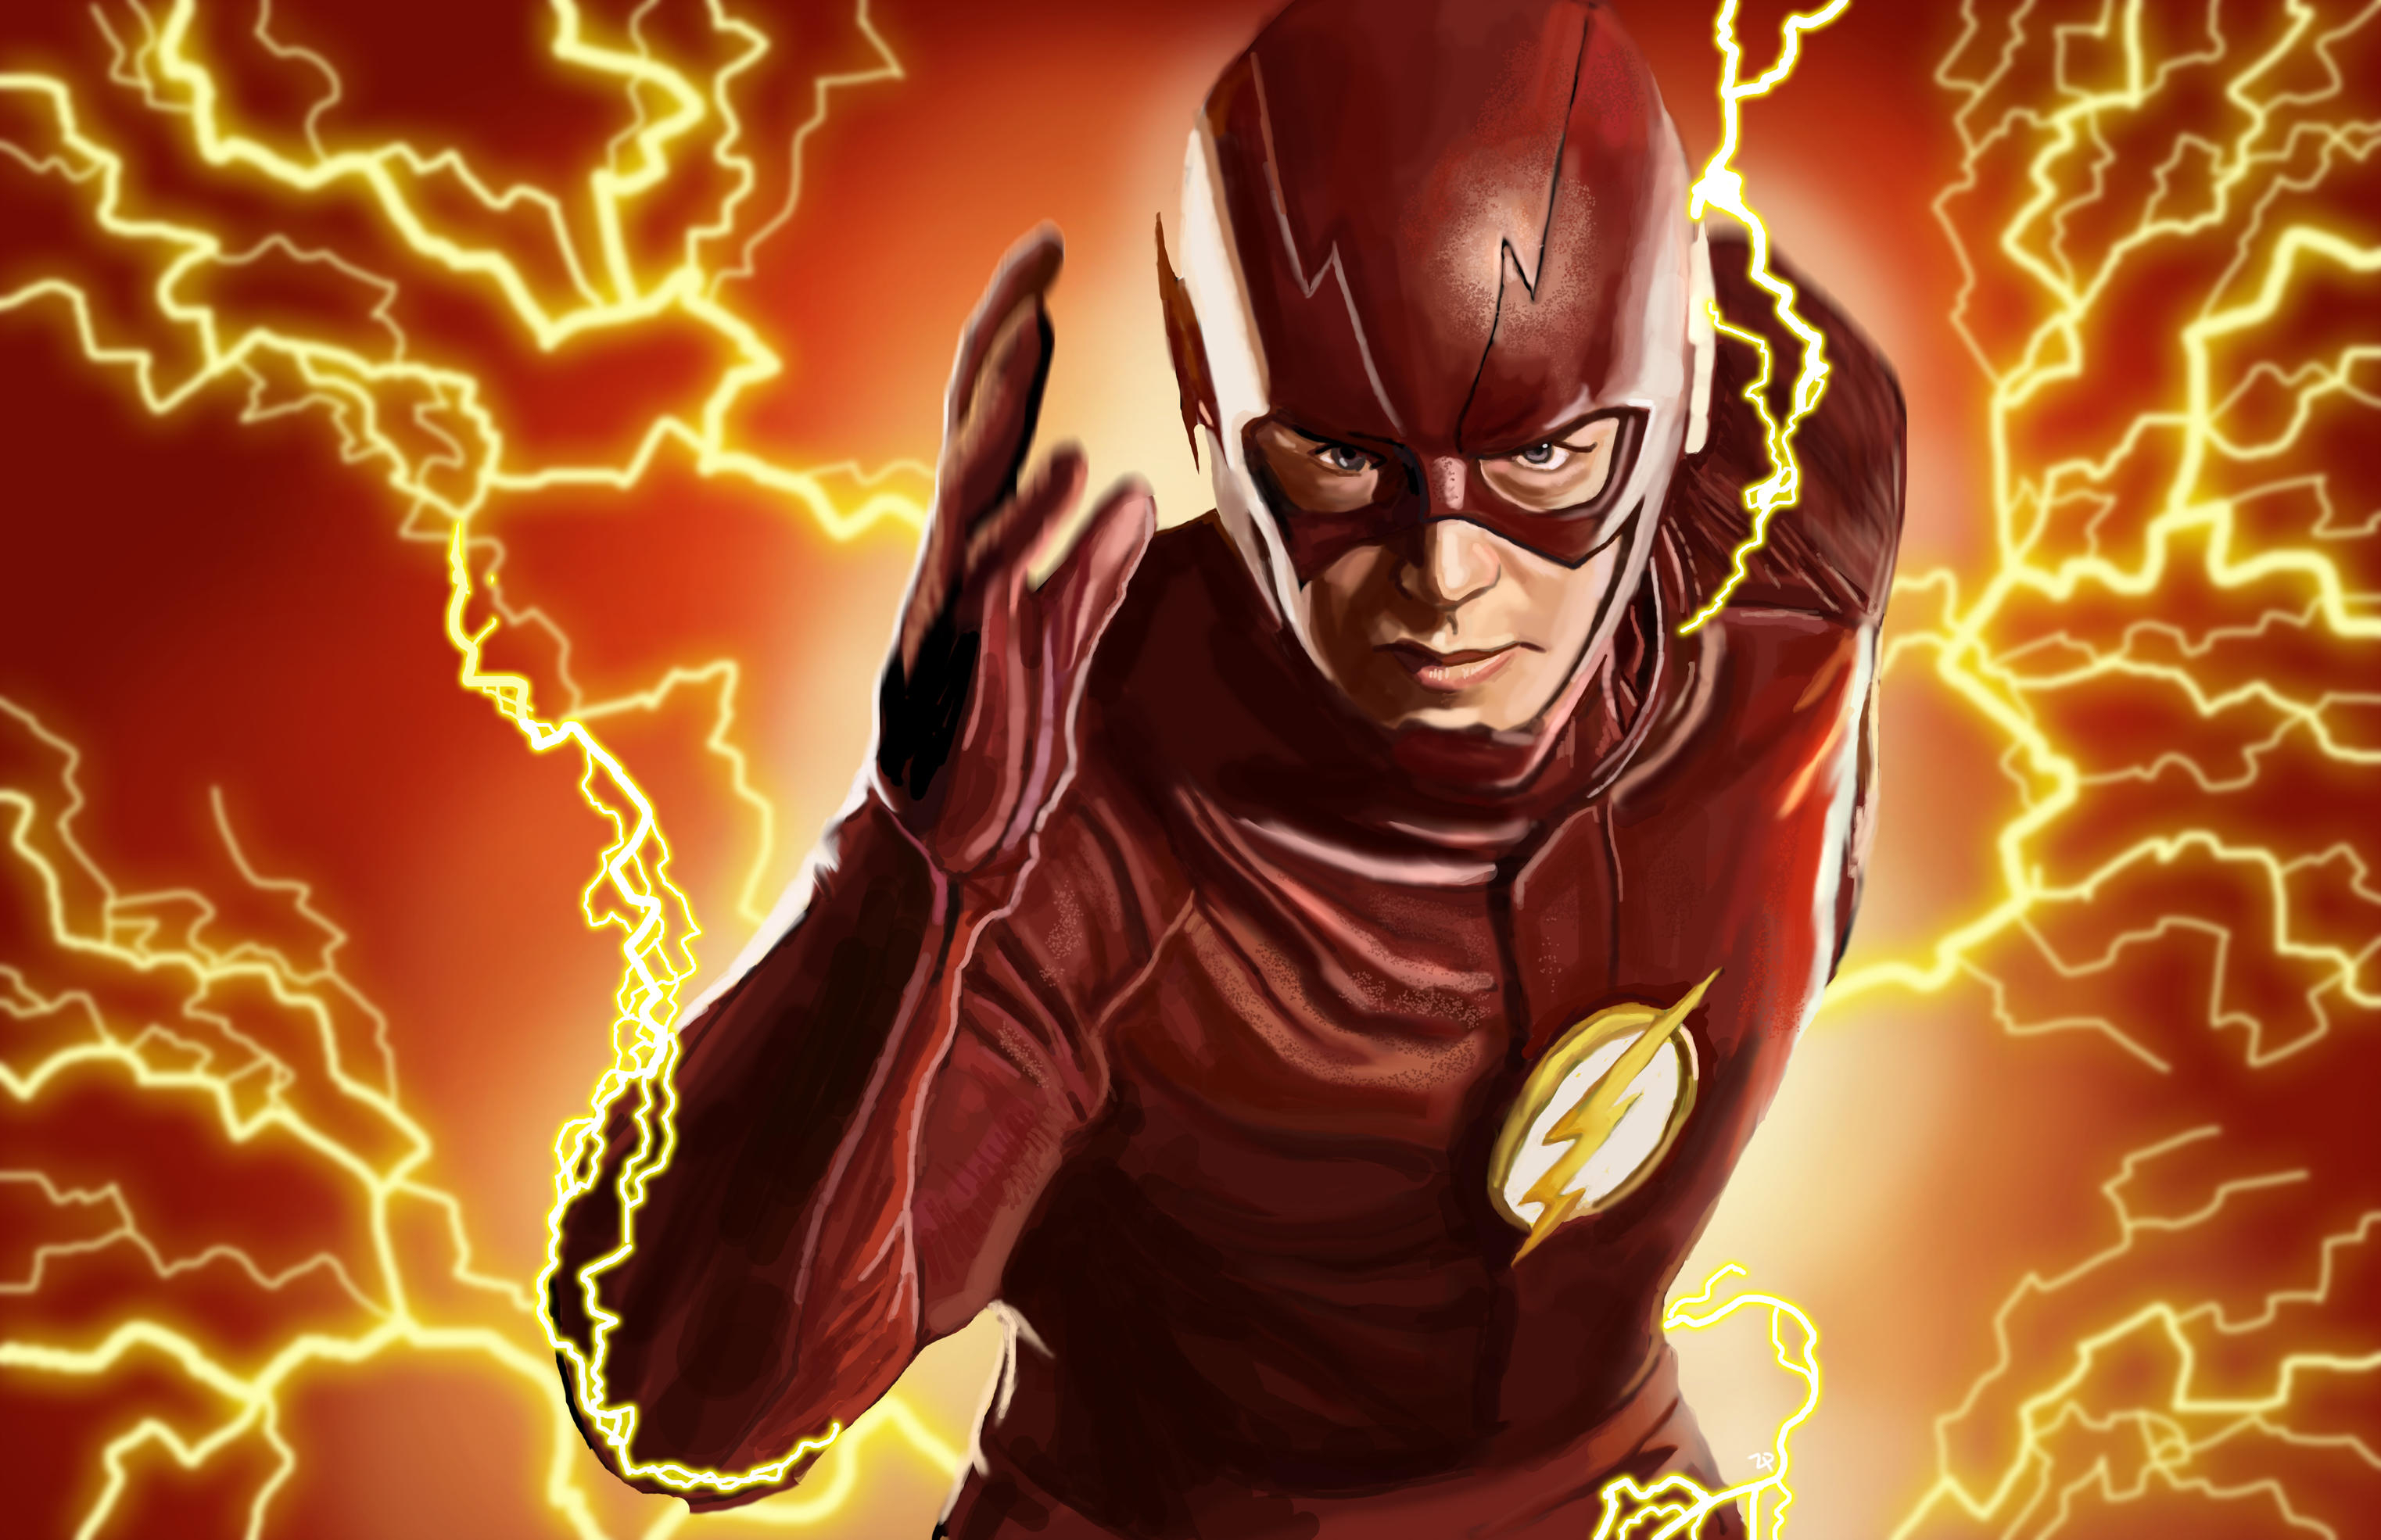 The Flash Art 4k, HD Superheroes, 4k Wallpapers, Images, Backgrounds